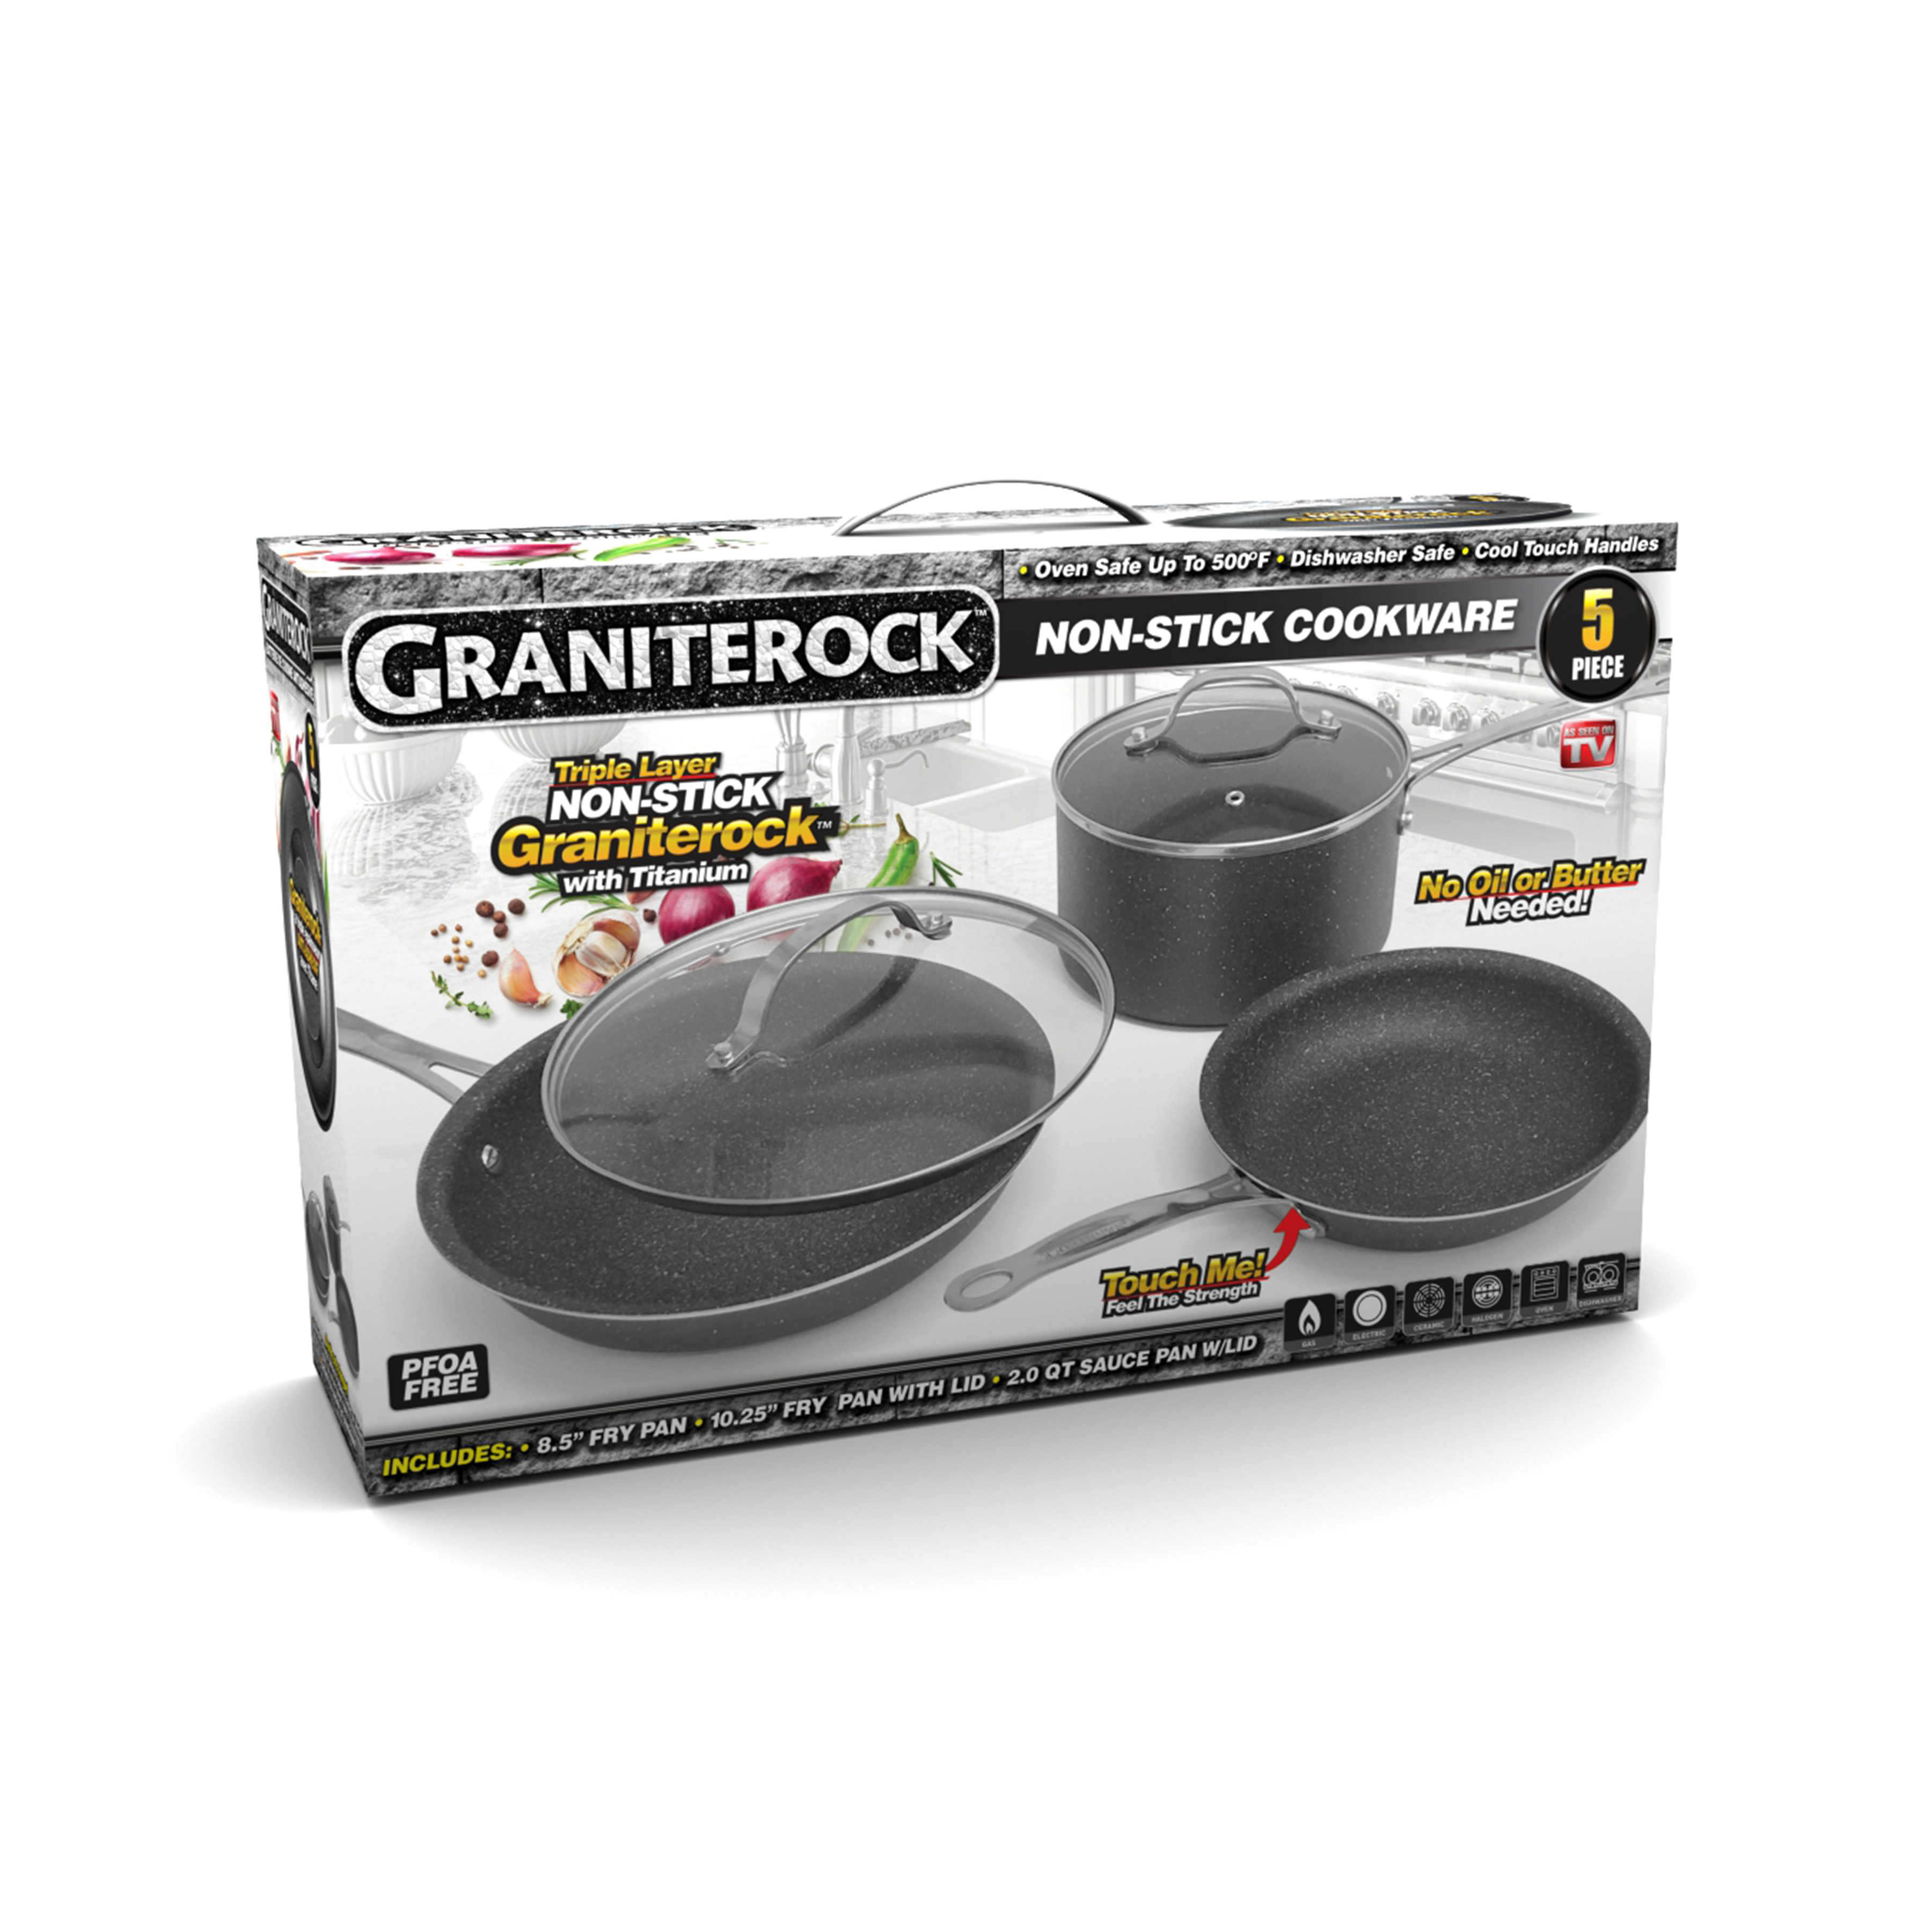 As Seen On TV 5 pc. Granite Rock Cookware Set